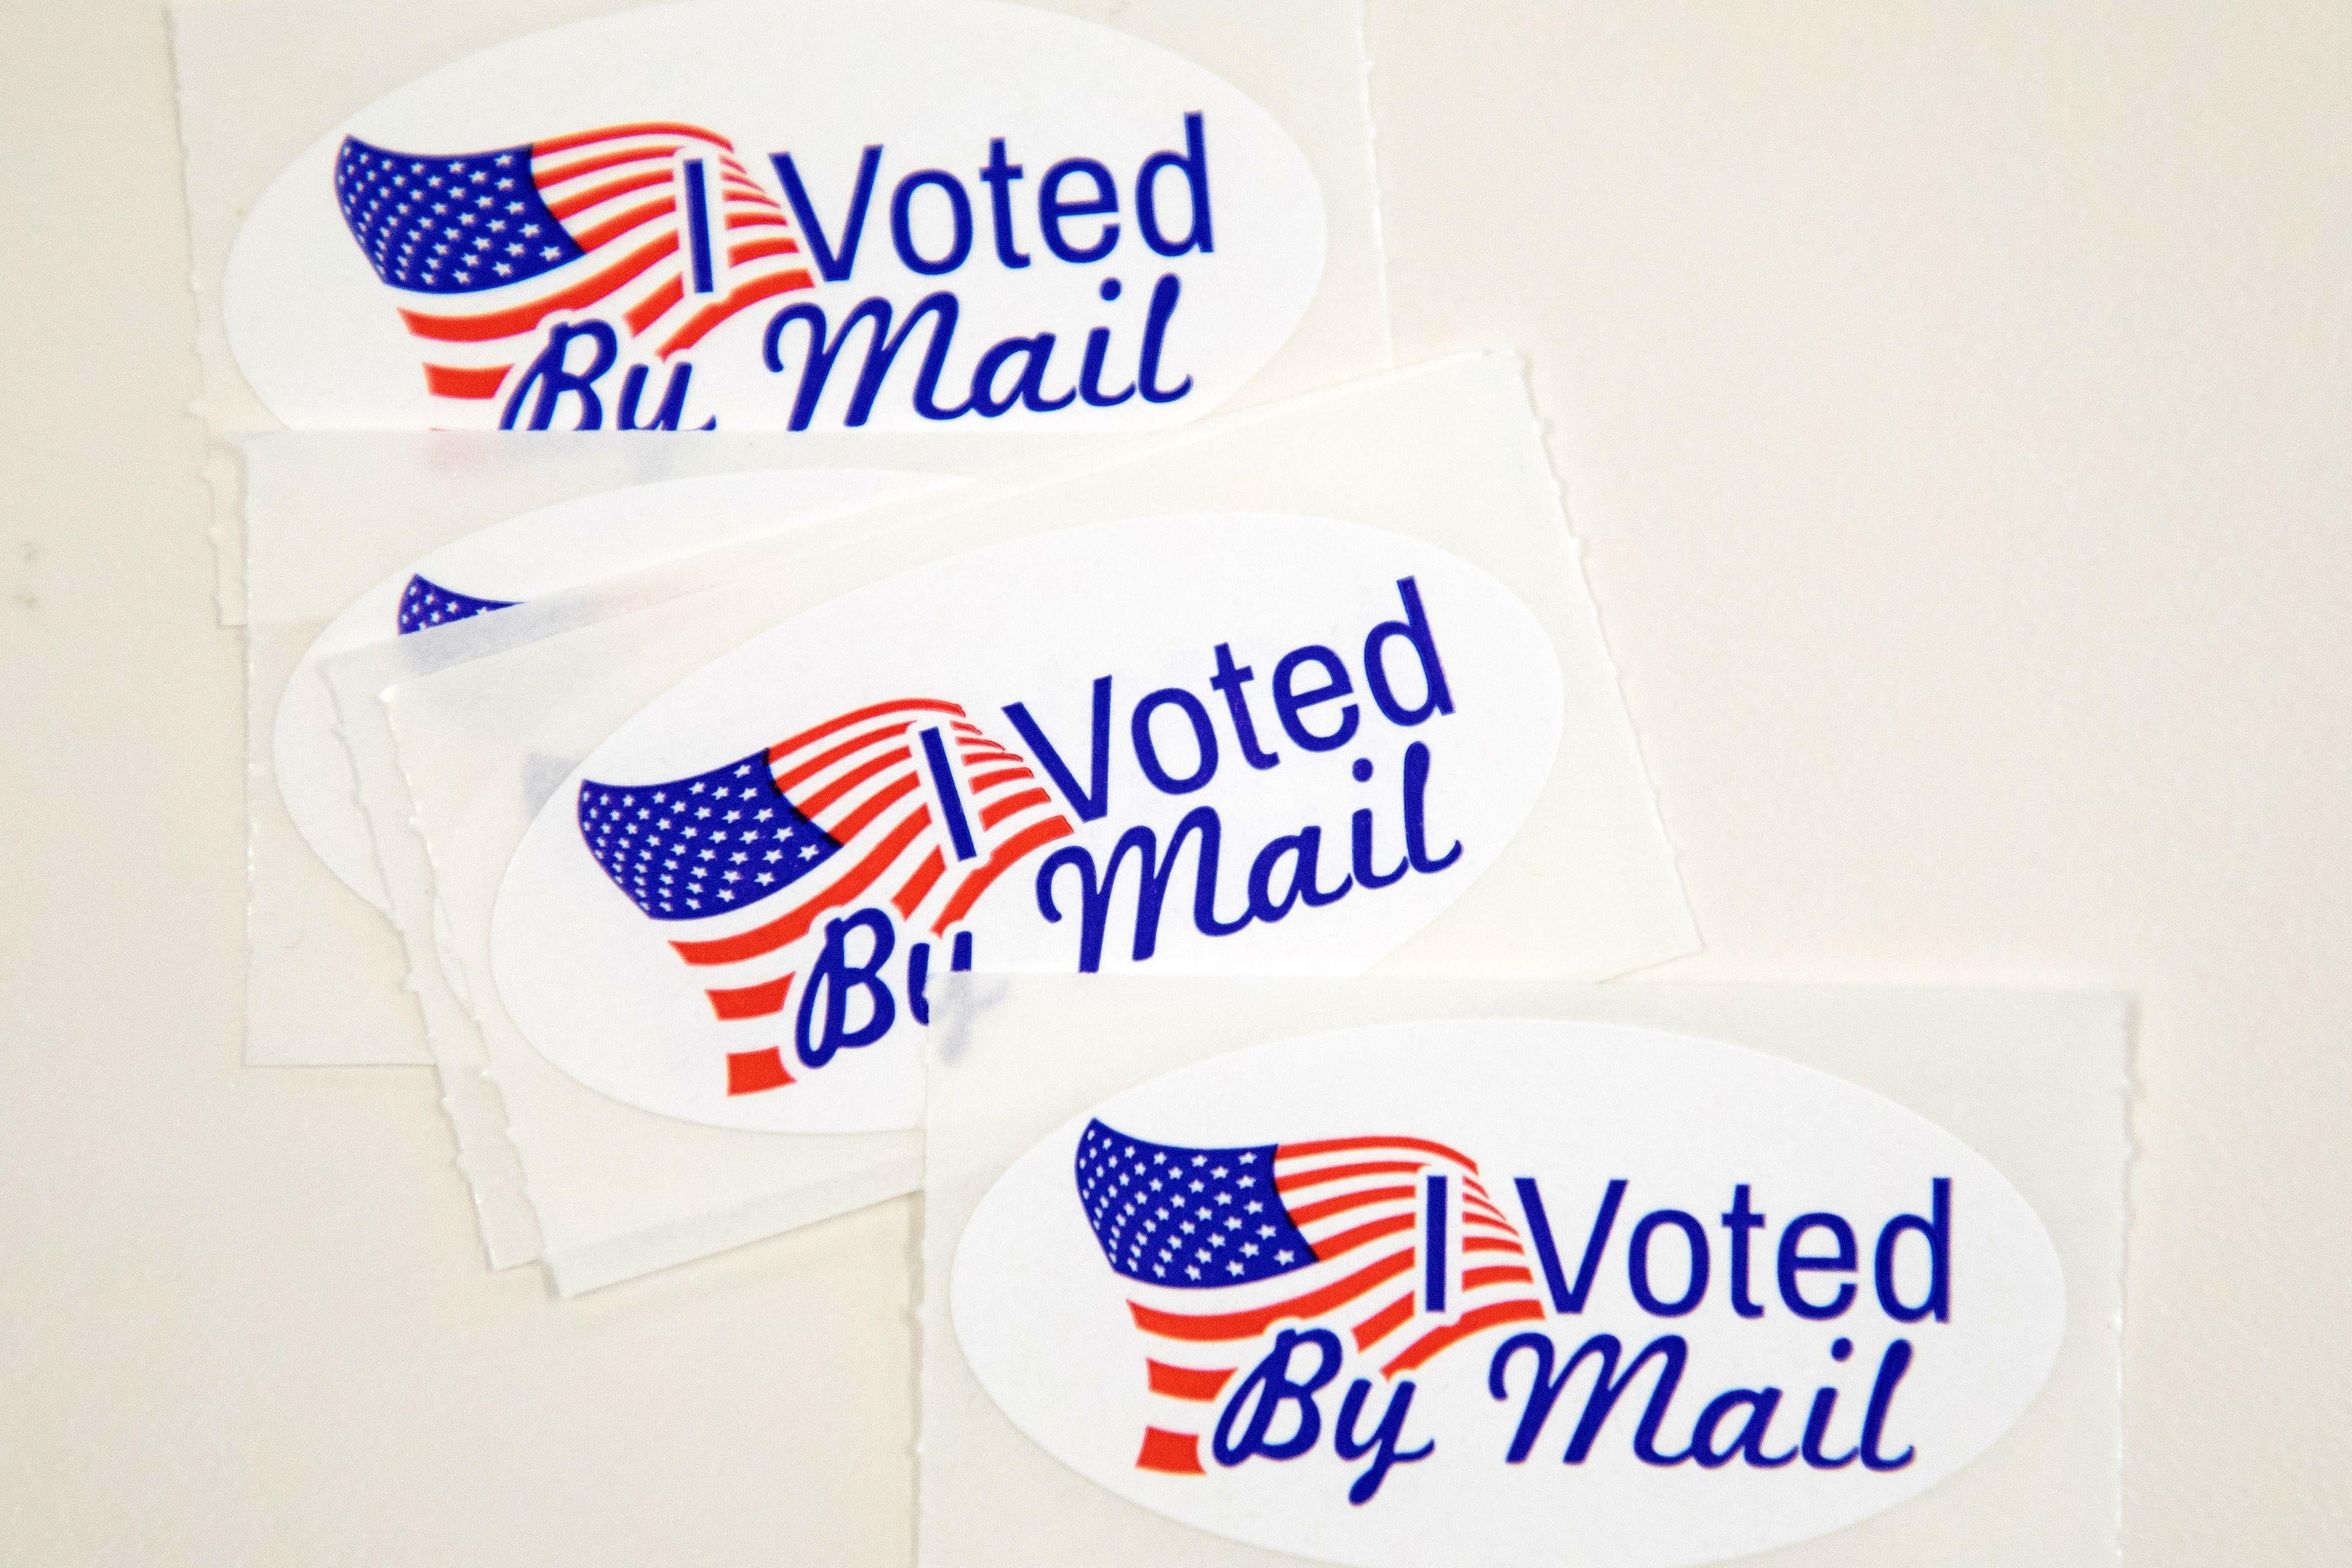 Stickers that read "I Voted By Mail" sit on a table waiting to be stuffed into envelopes by absentee ballot election workers at the Mecklenburg County Board of Elections office in Charlotte, NC on September 4, 2020. 